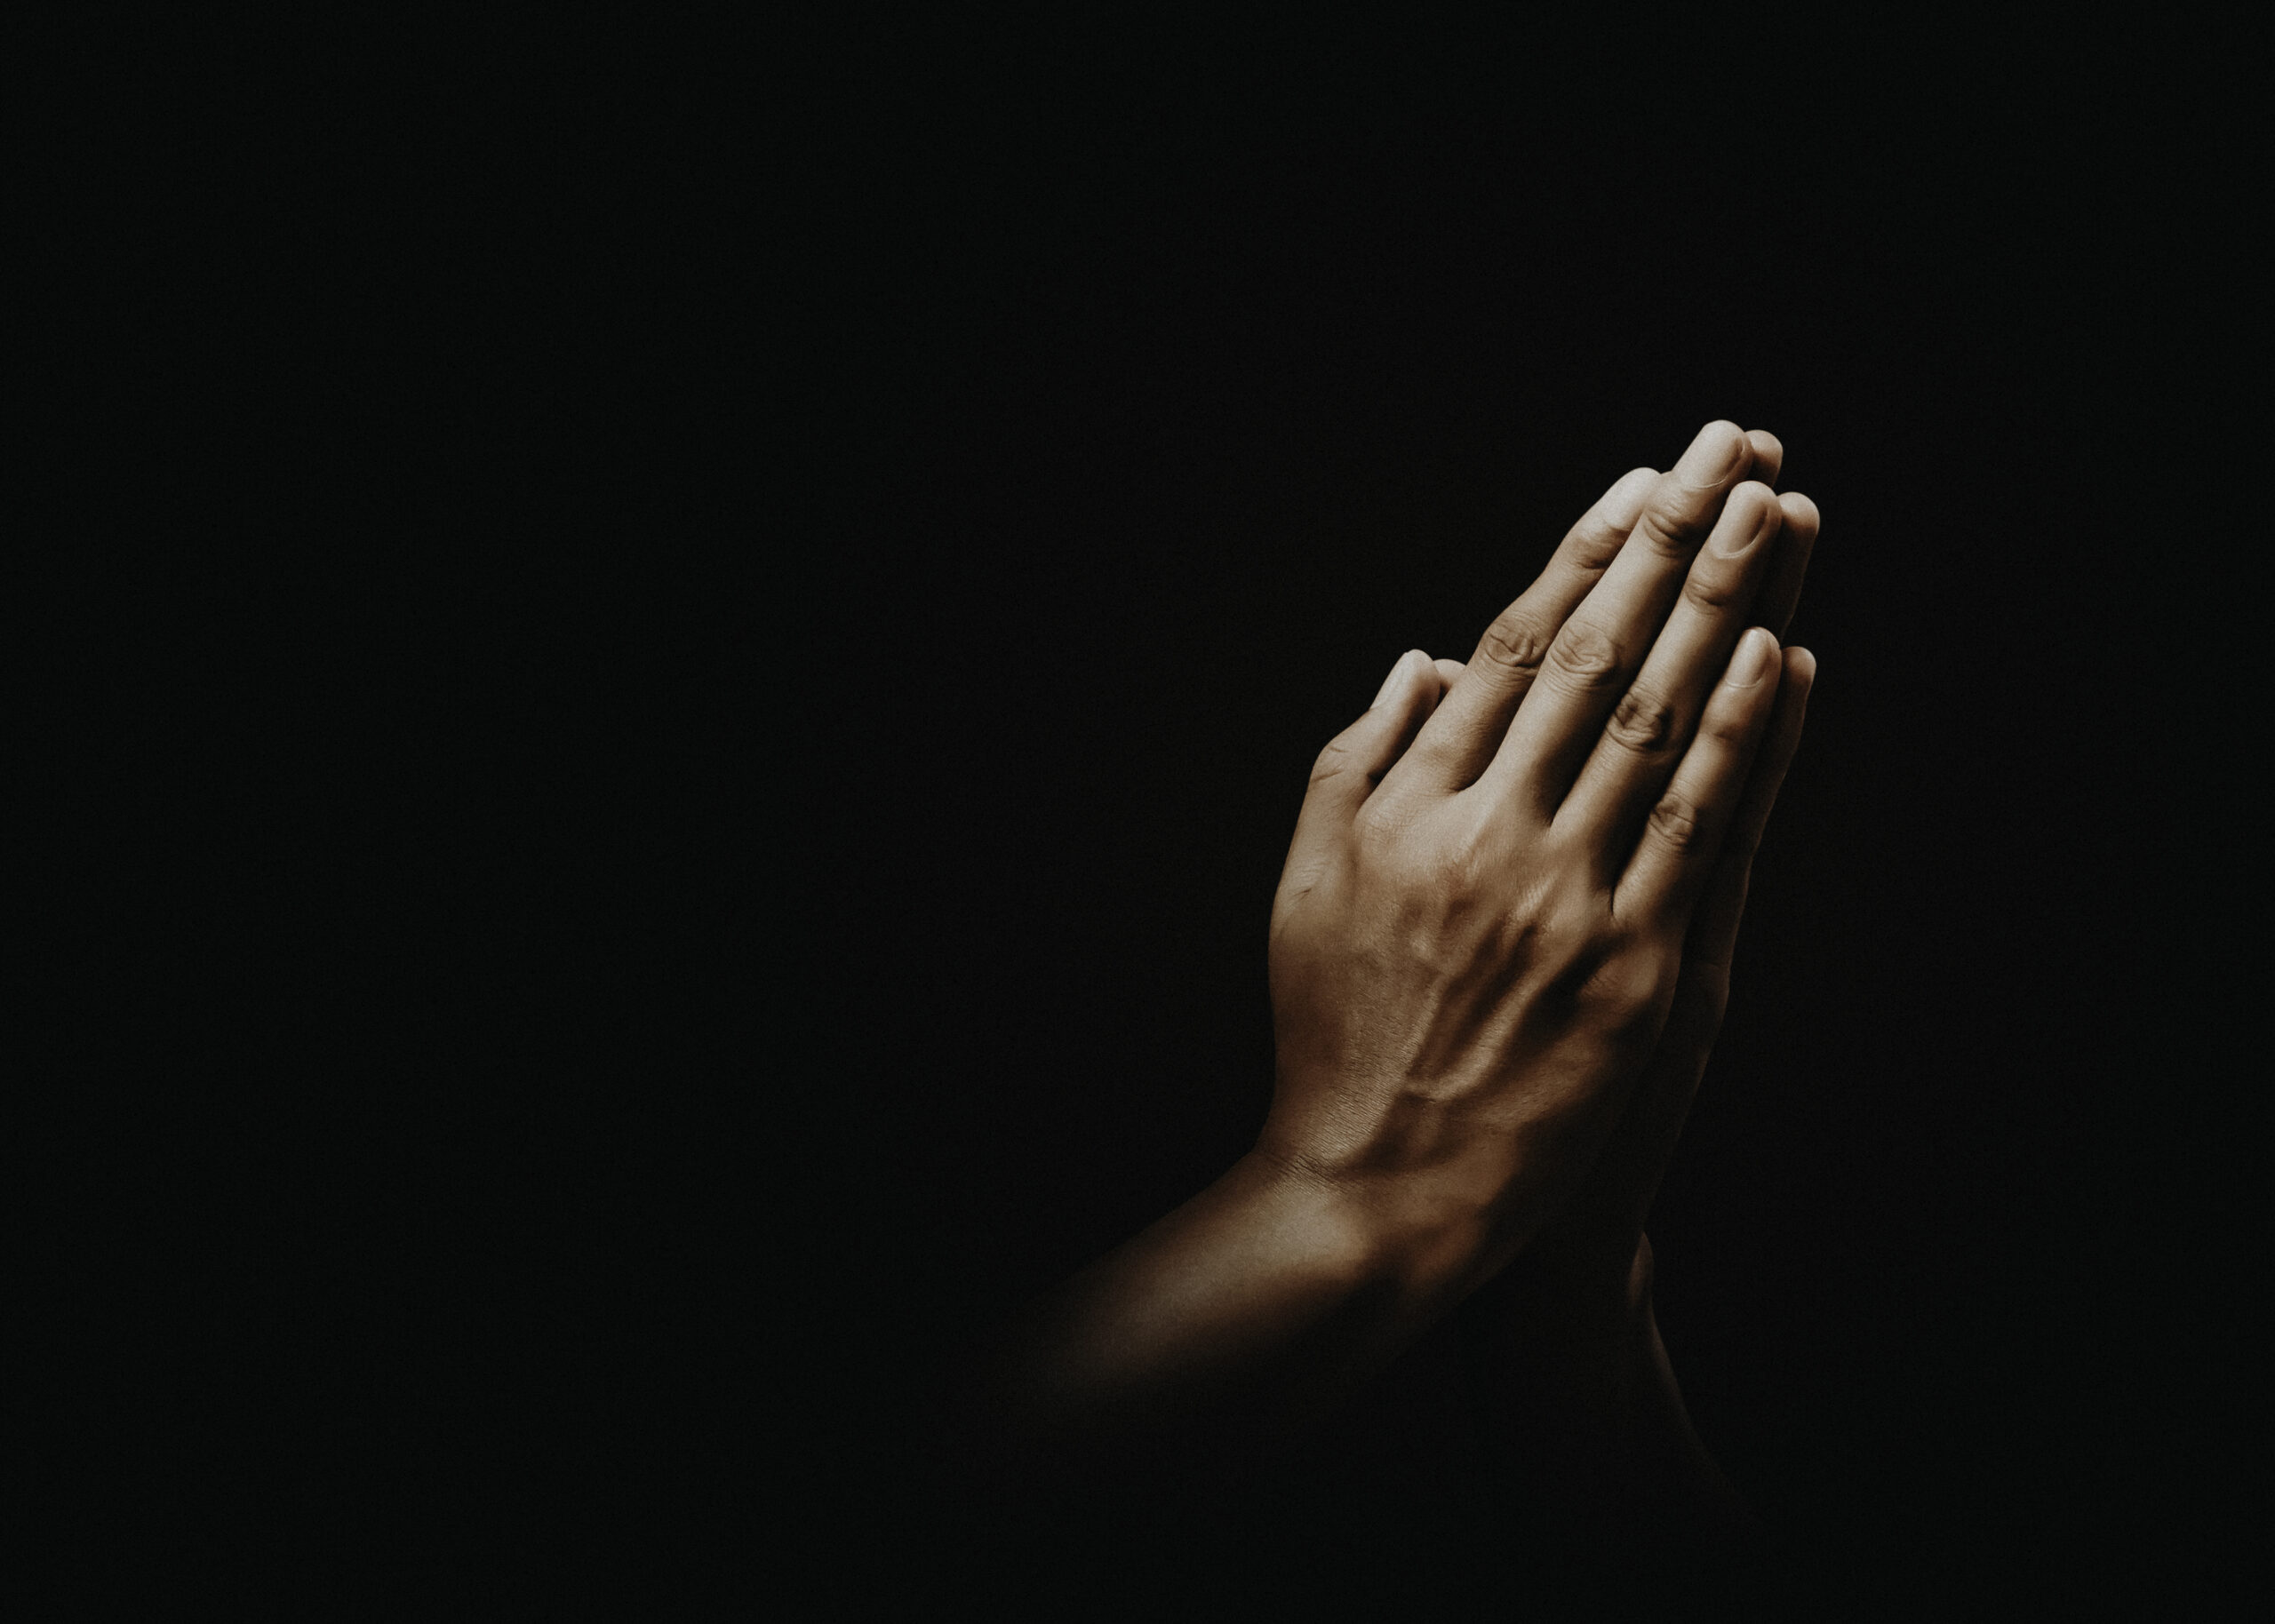 Praying hands with faith in religion and belief in God on dark b.